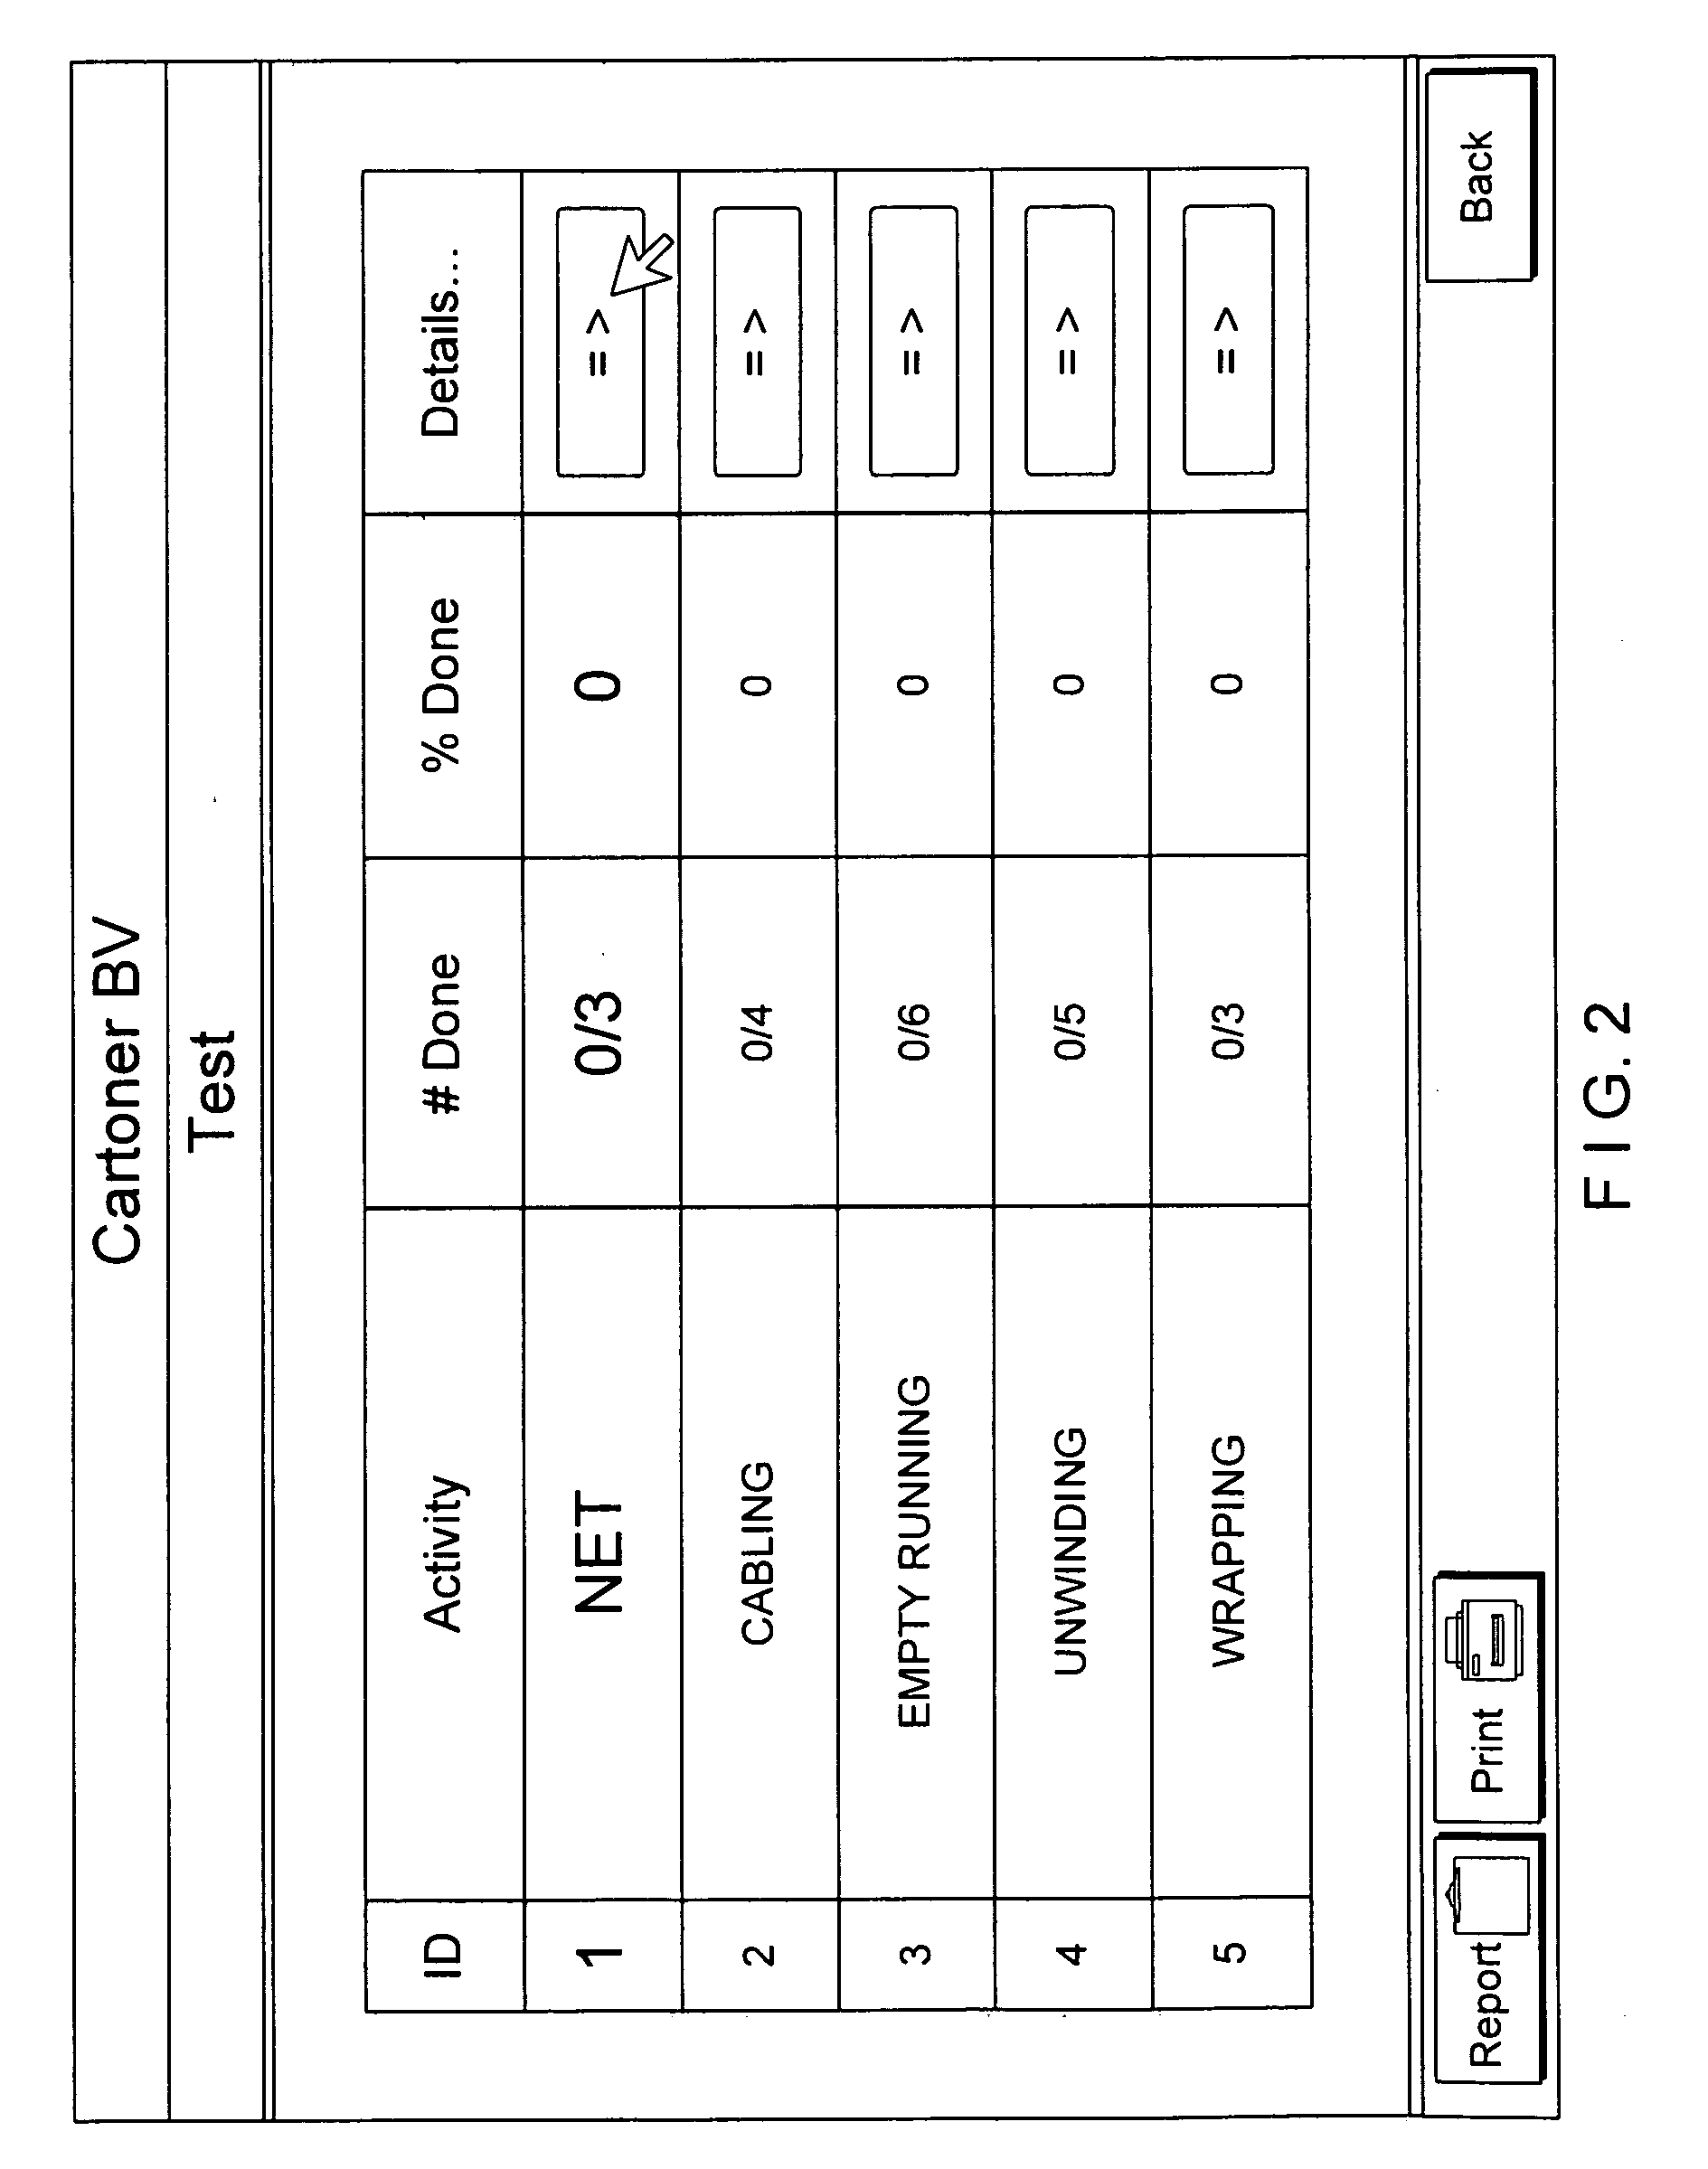 Method of controlling an automatic production/packing machine